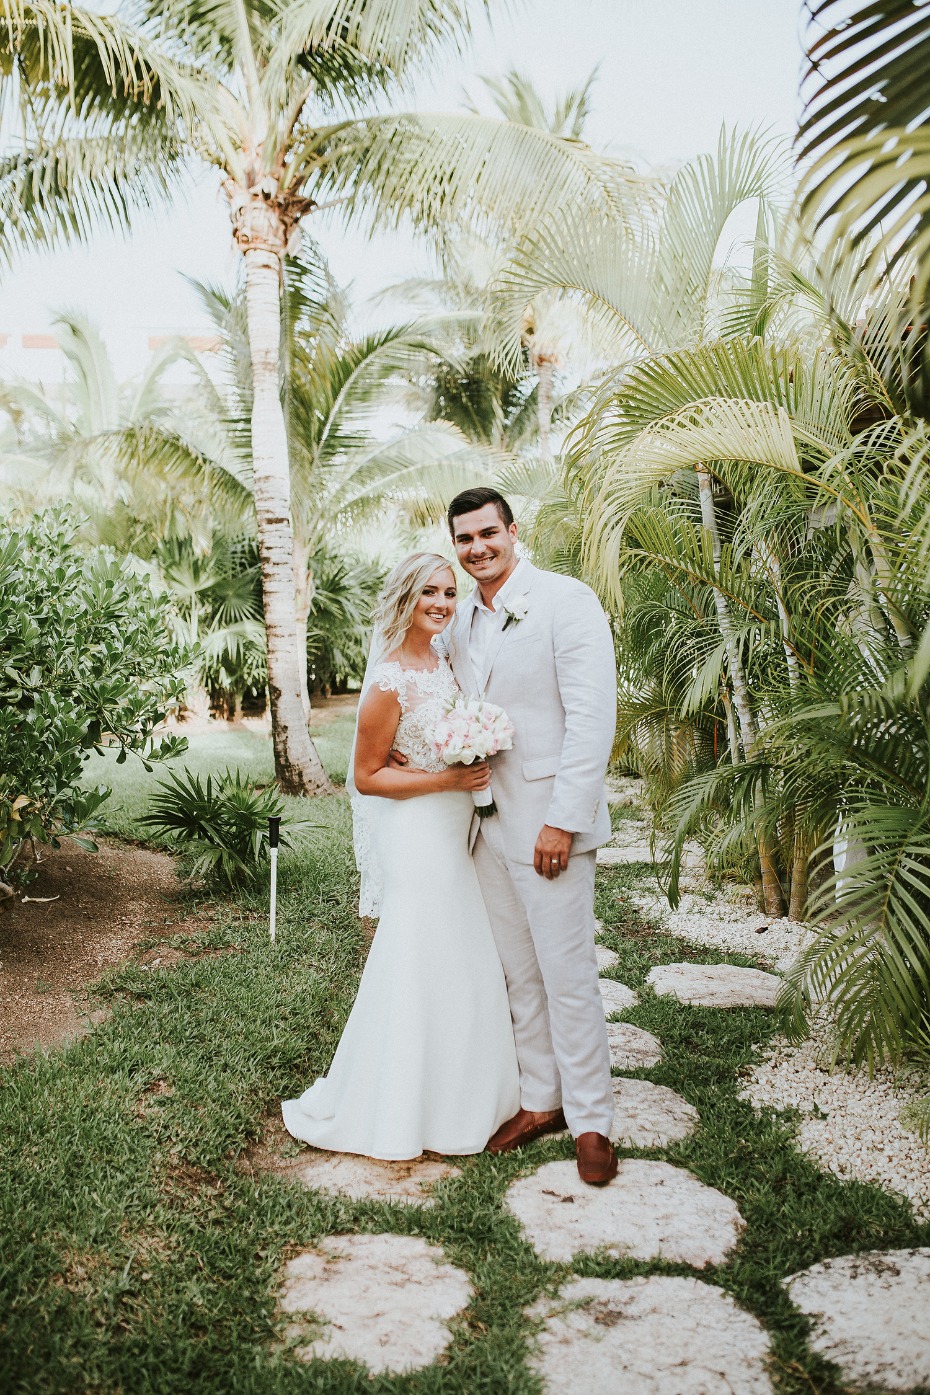 The palm trees swayed at this beach wedding in Mexico